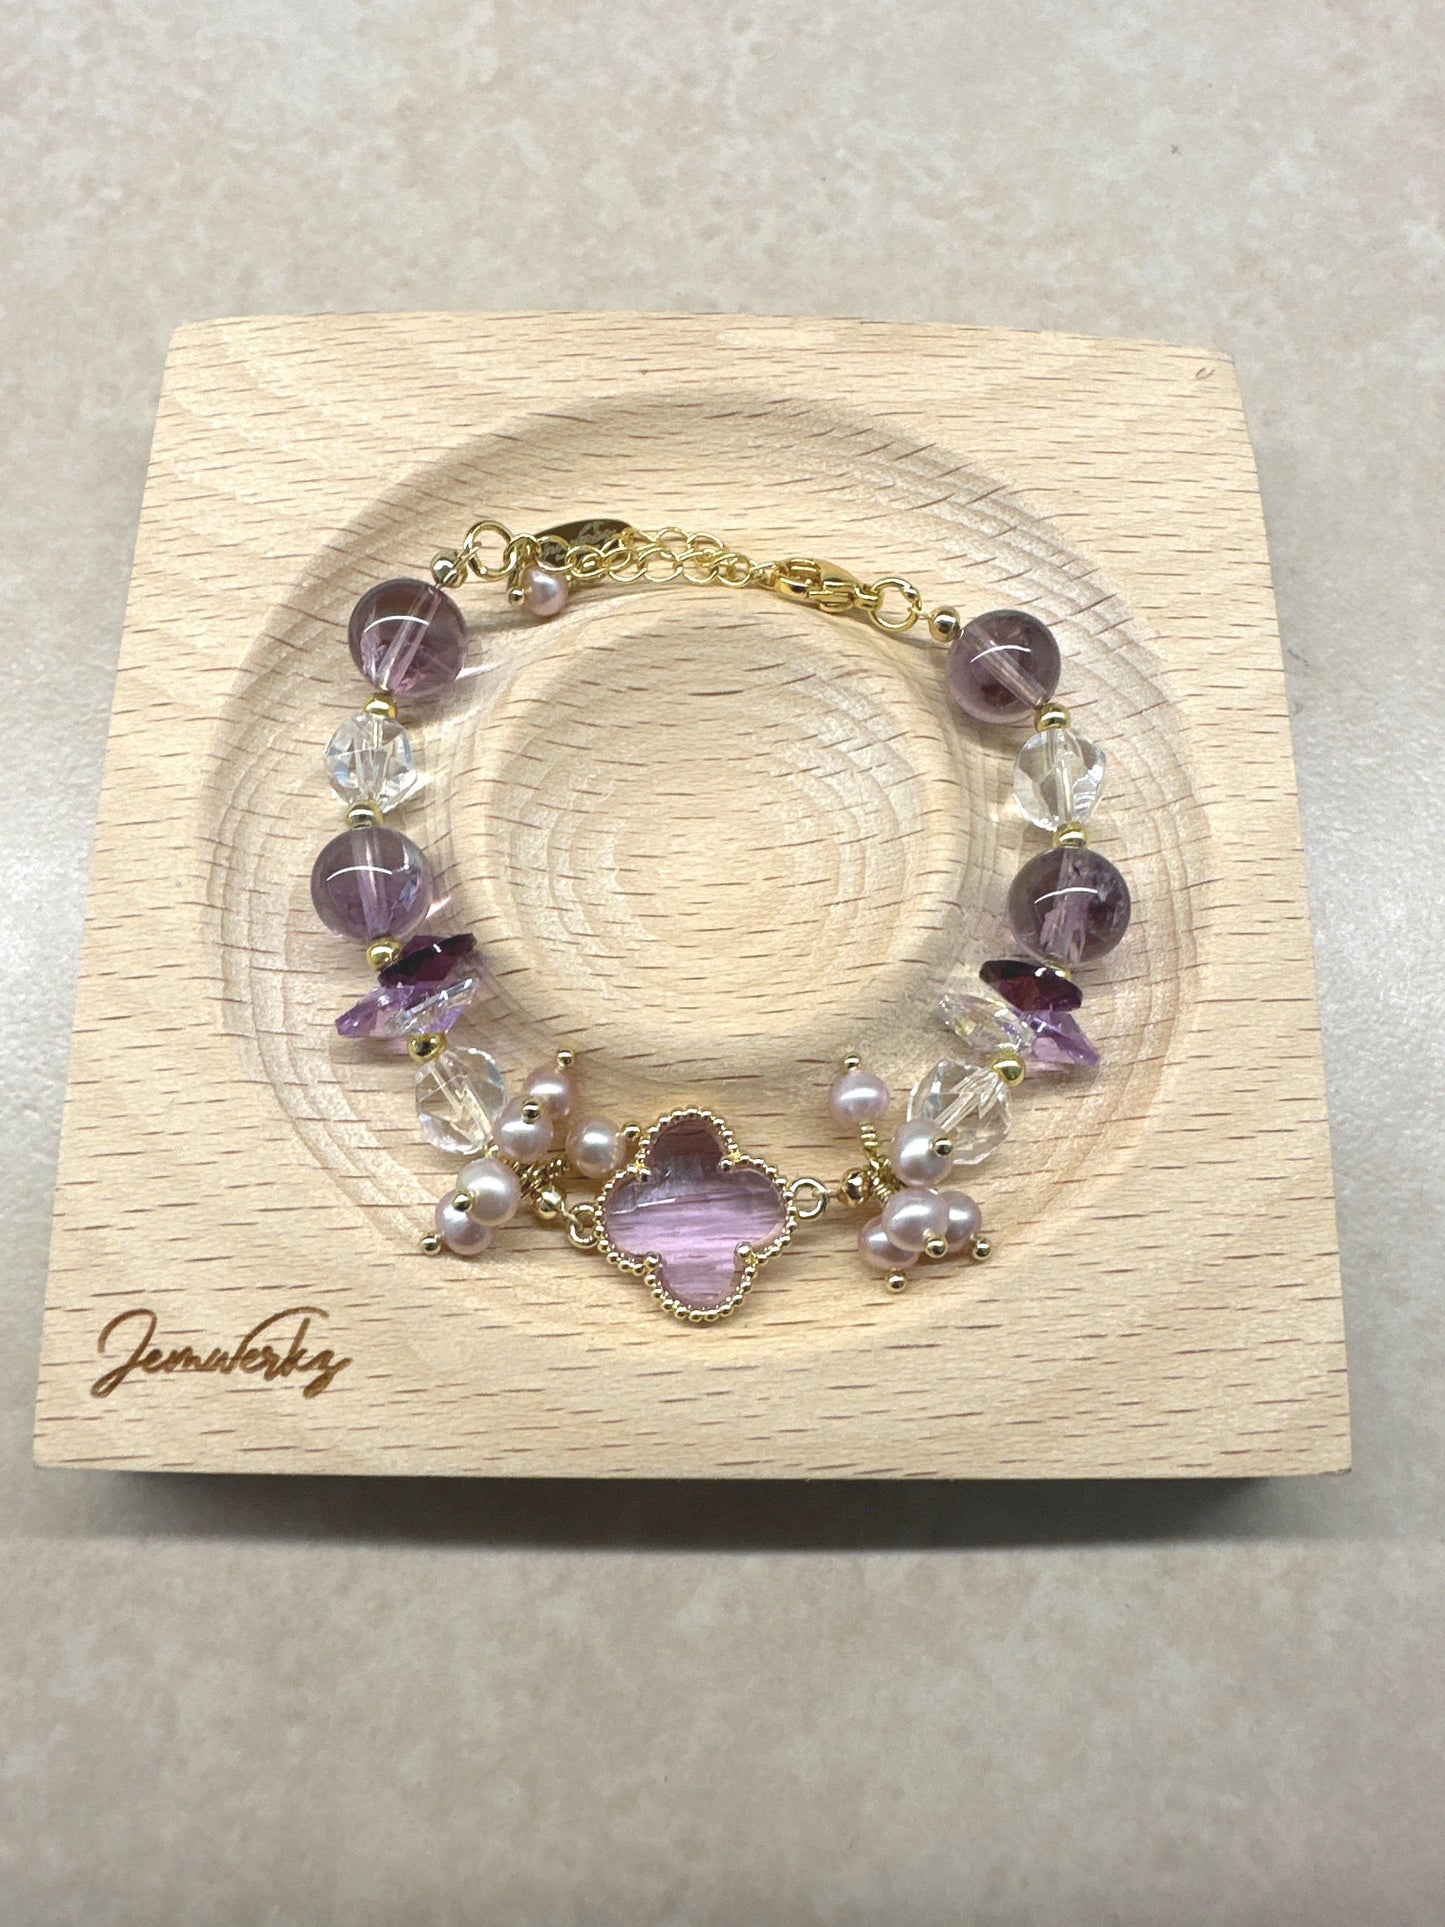 CHIYOKO 1.1 - Purple Clover with Amethyst, Clear Quartz and Pink Freshwater Pearls Bracelet